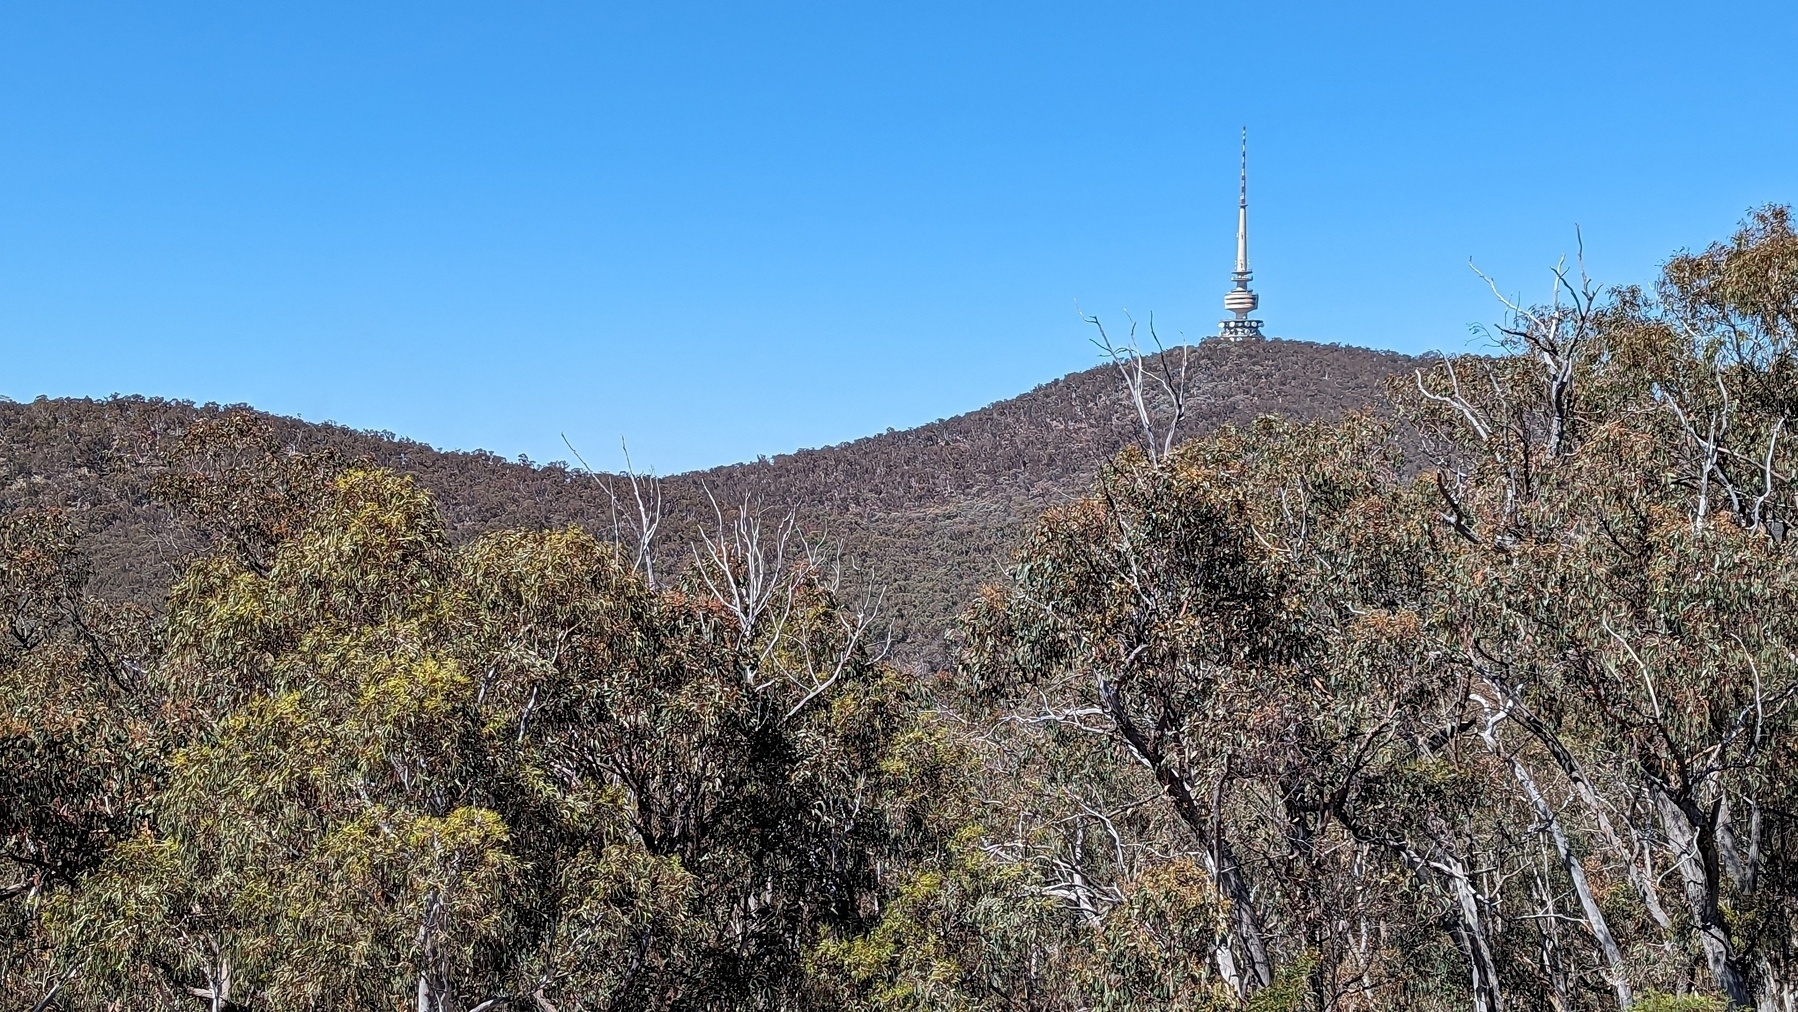 Black Mountain in Canberra, covered in eucalyptus trees, with an iconic communications tower at the top.